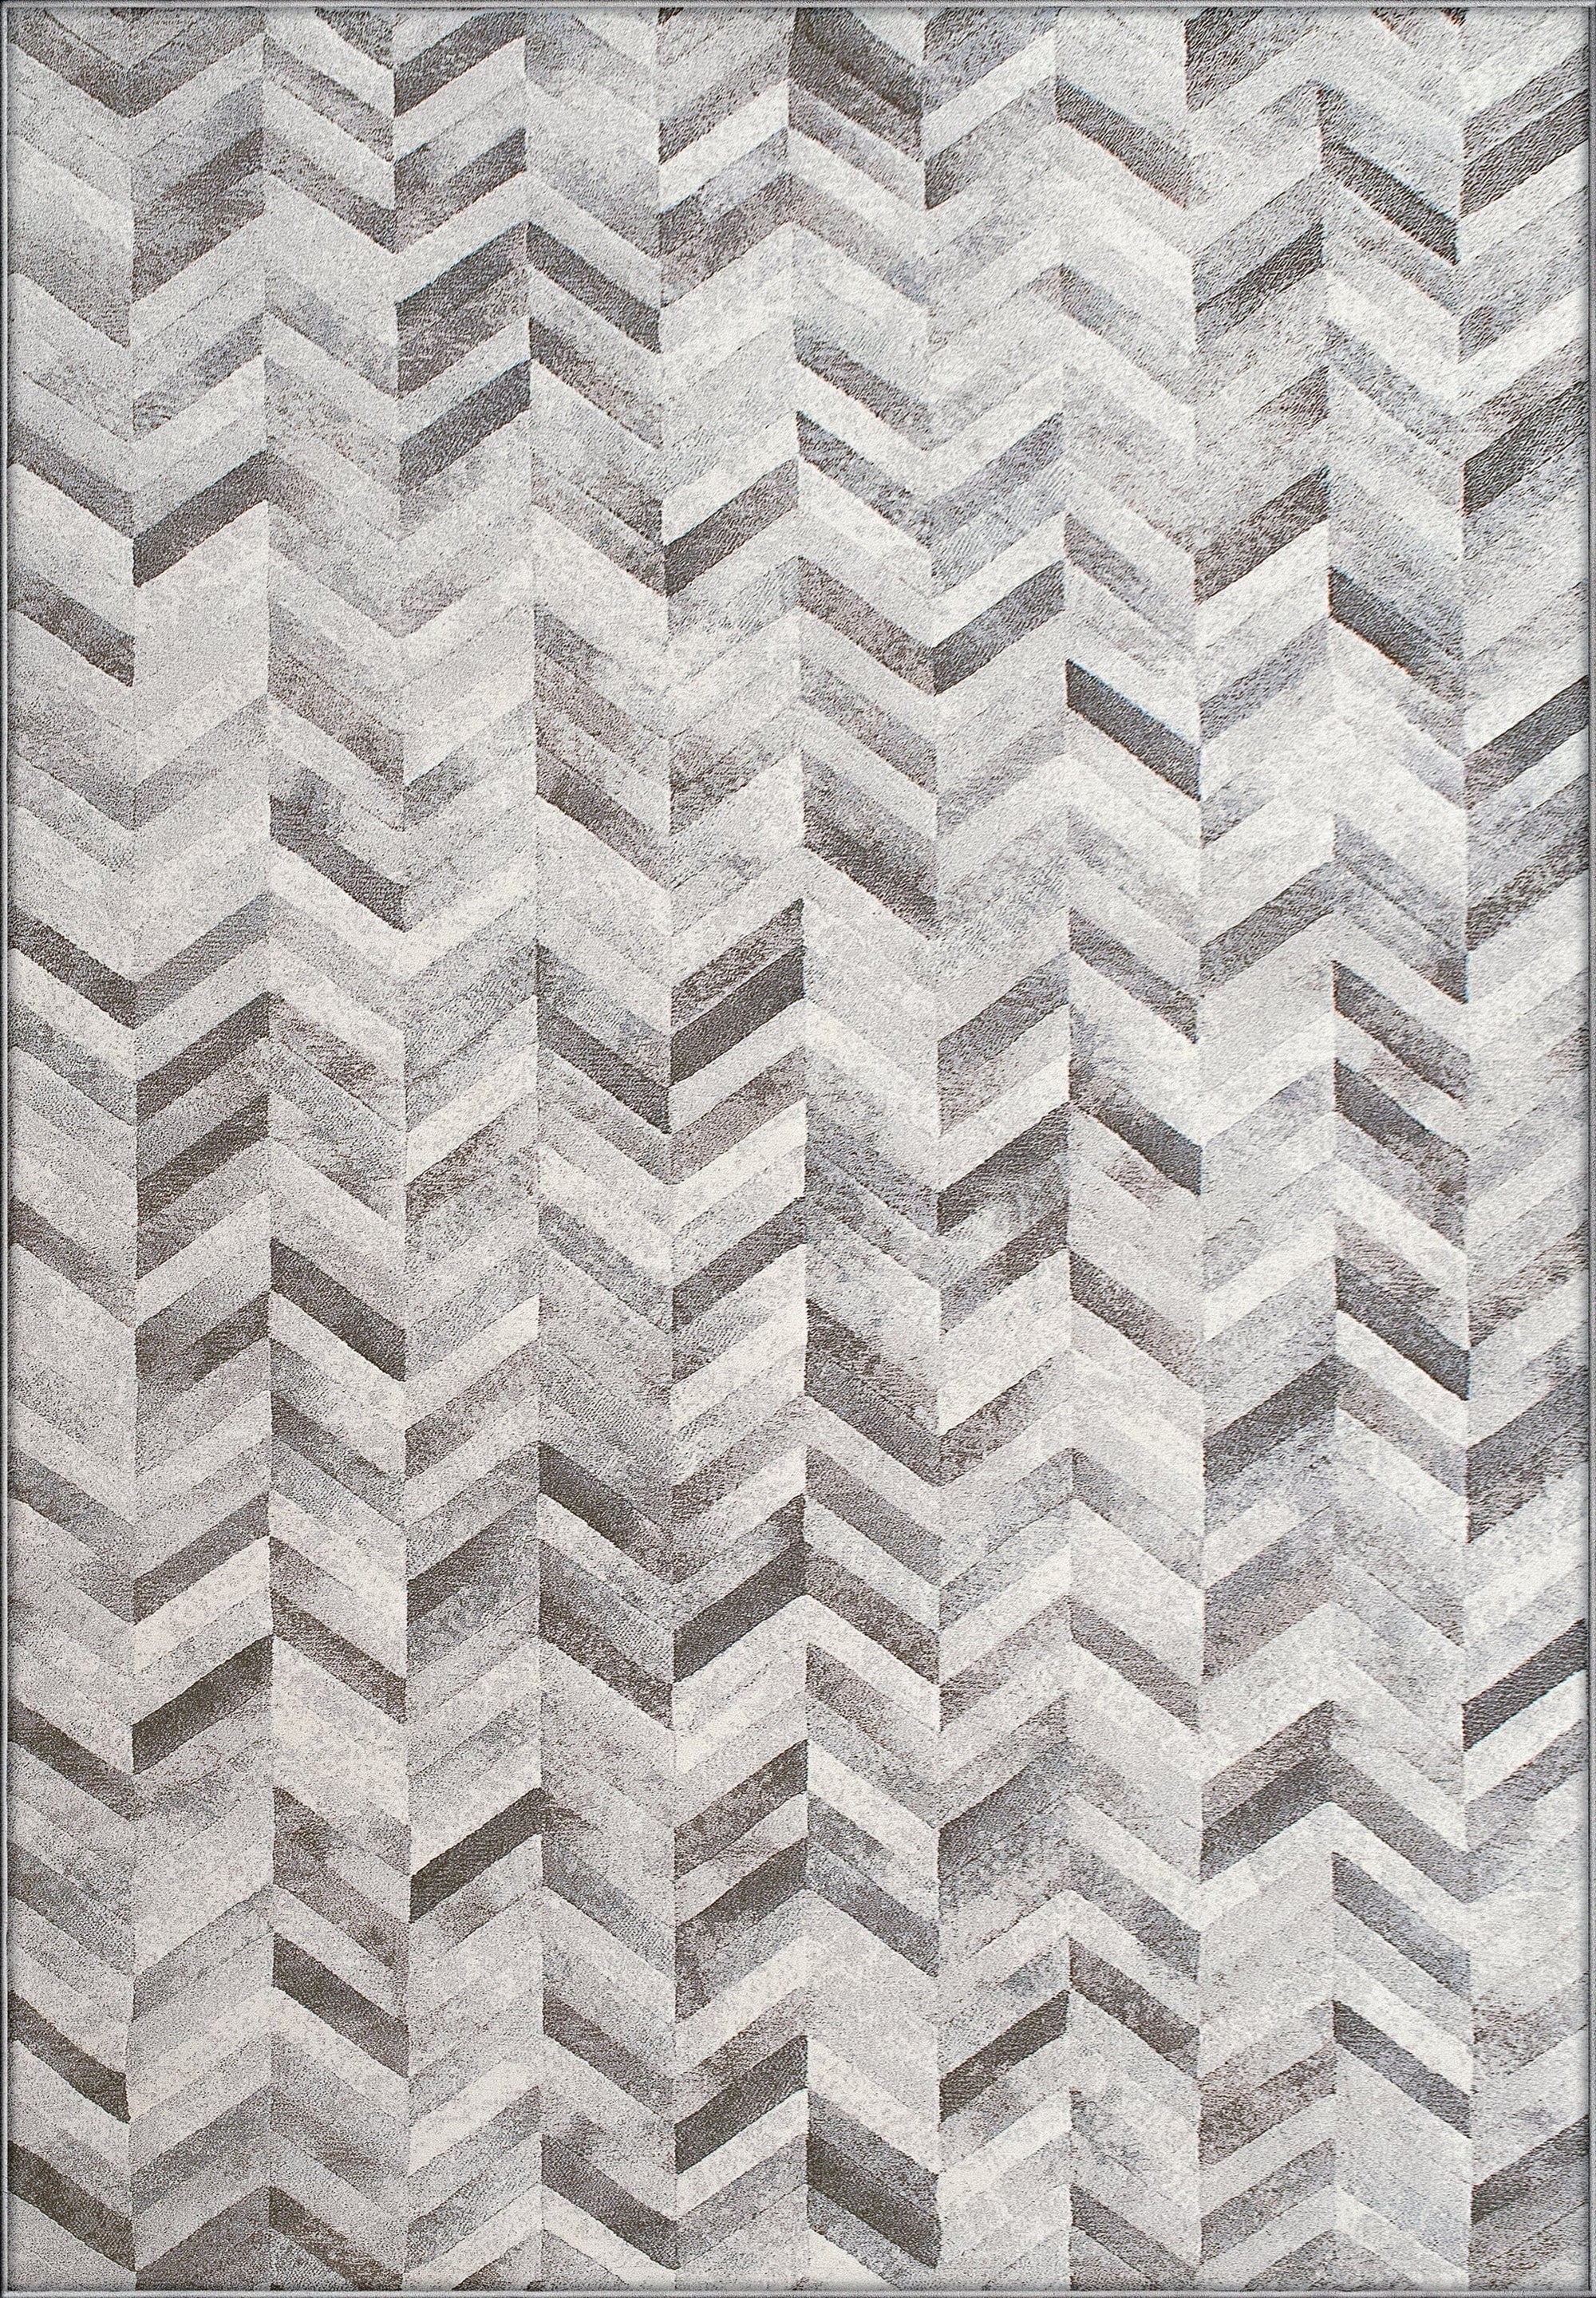 Anne Klein Silver The Illusions Contemporary Geometric Rug Collection